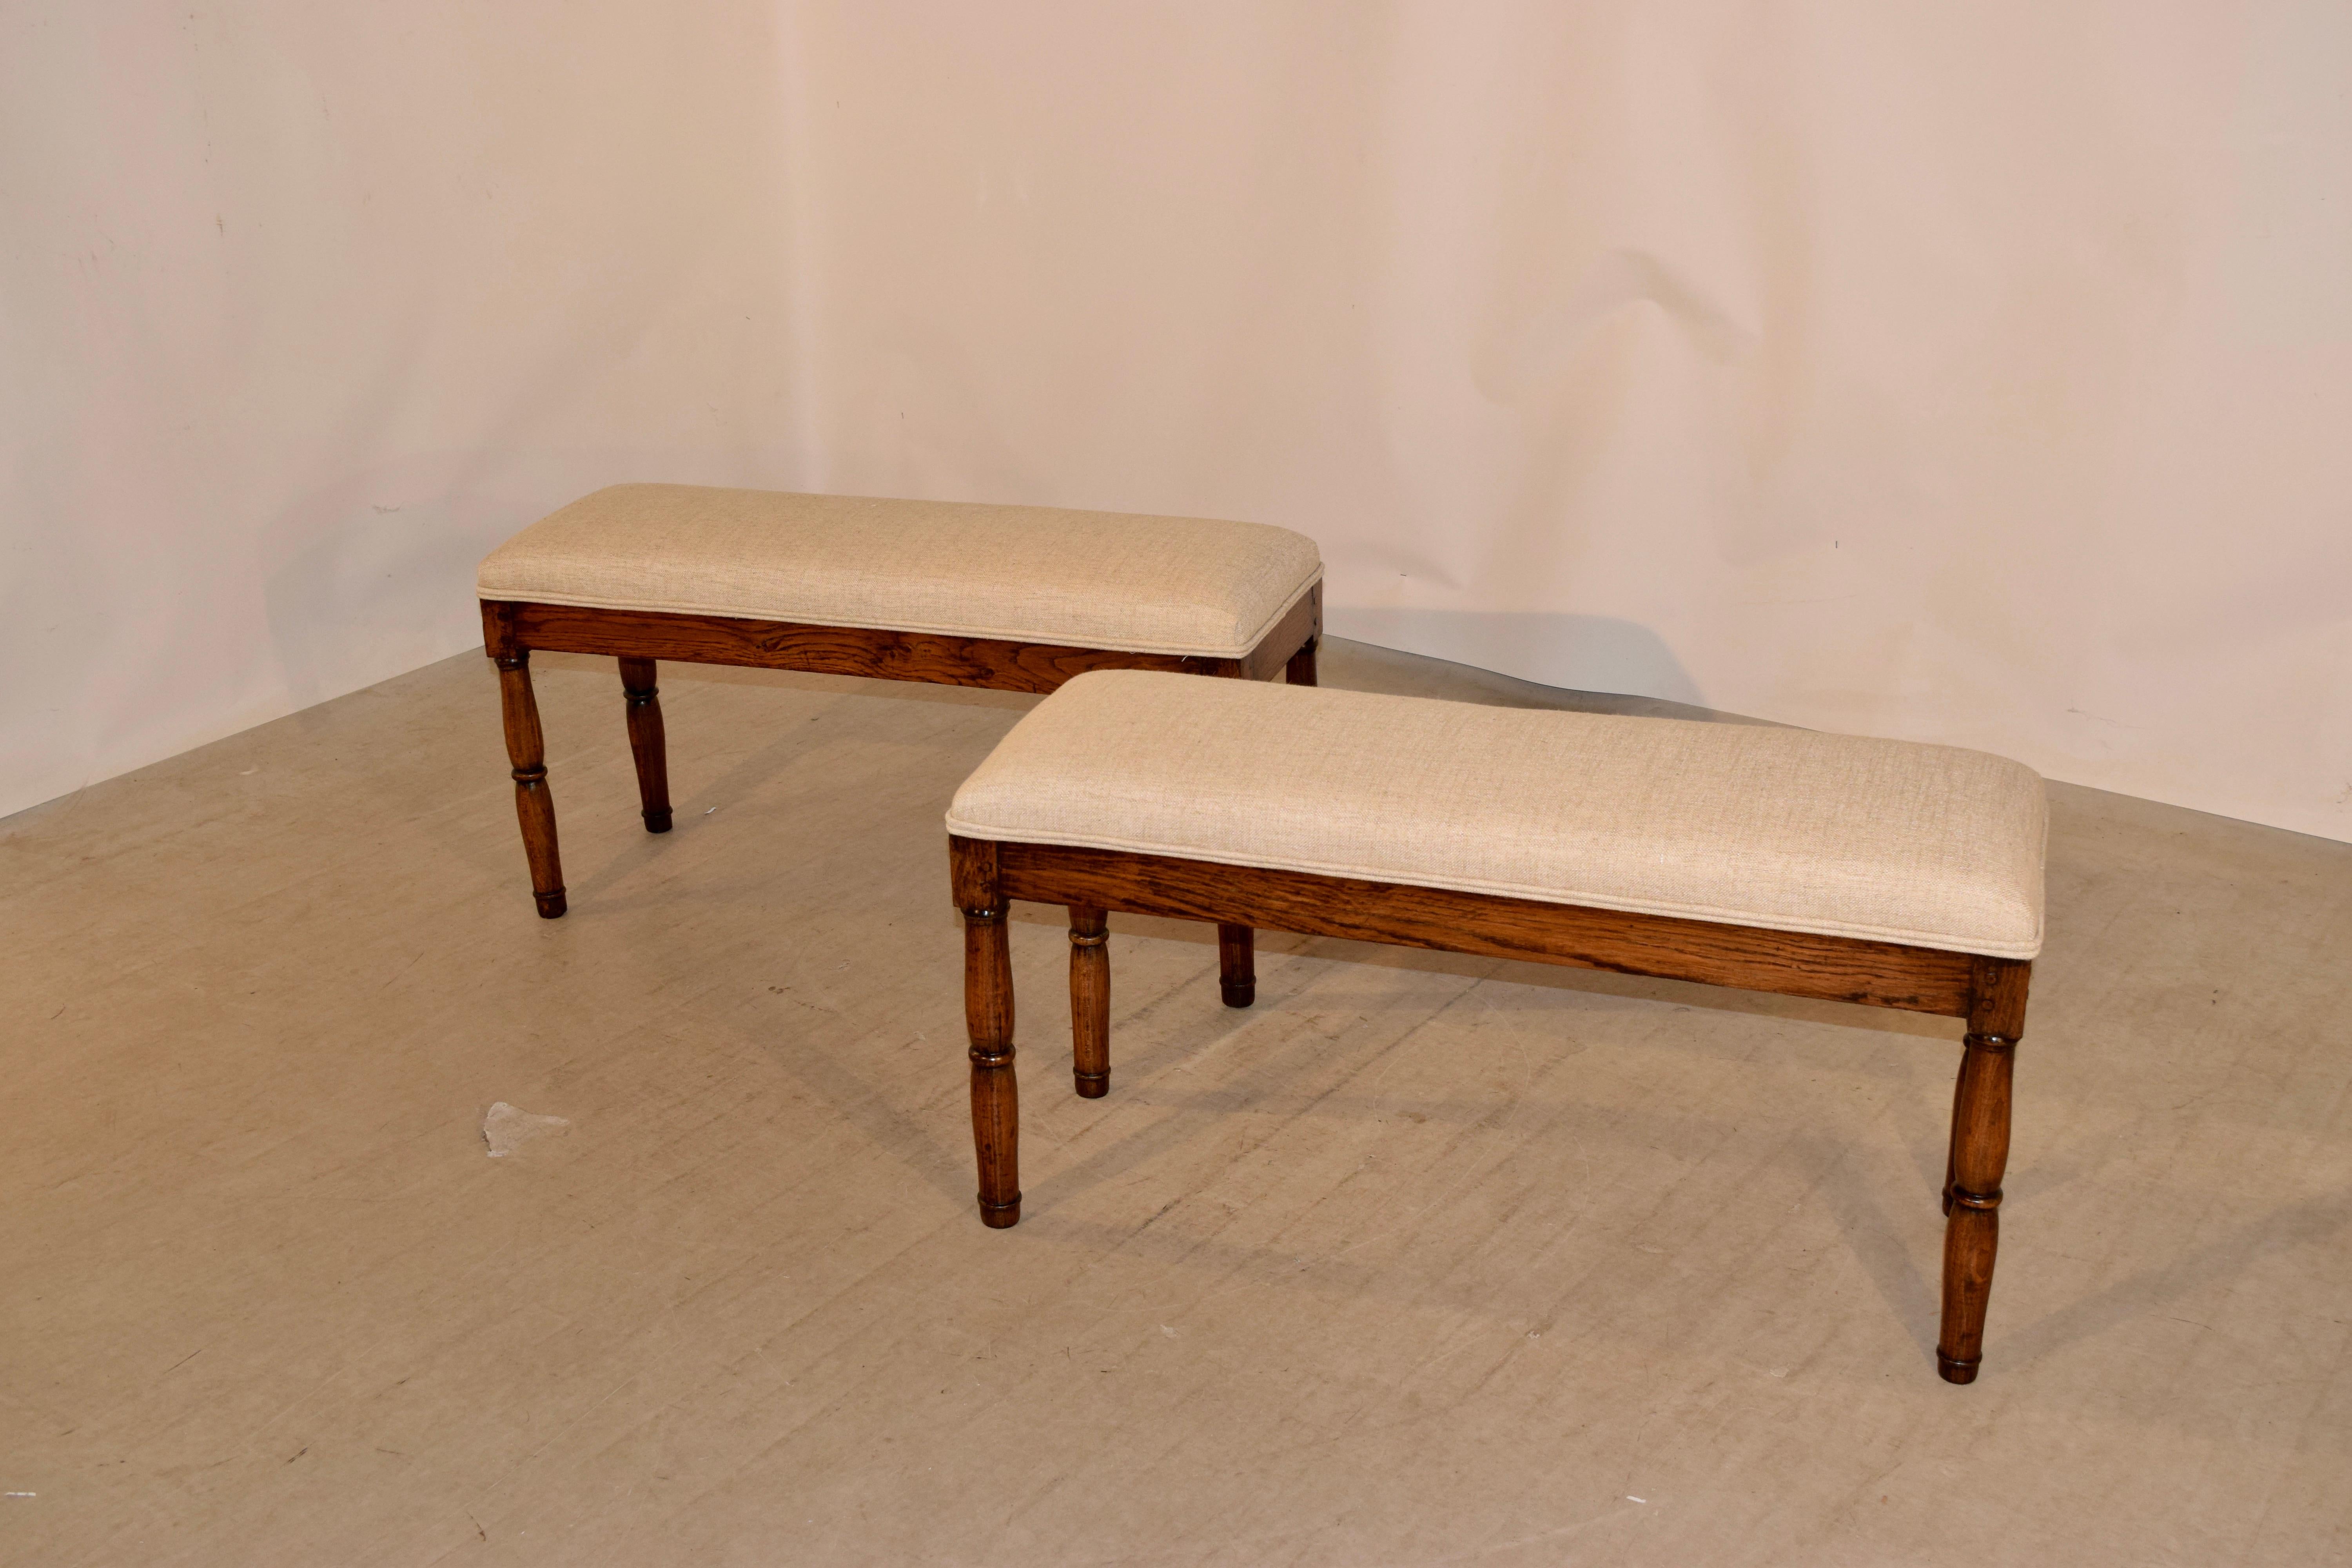 upholstered bench with storage